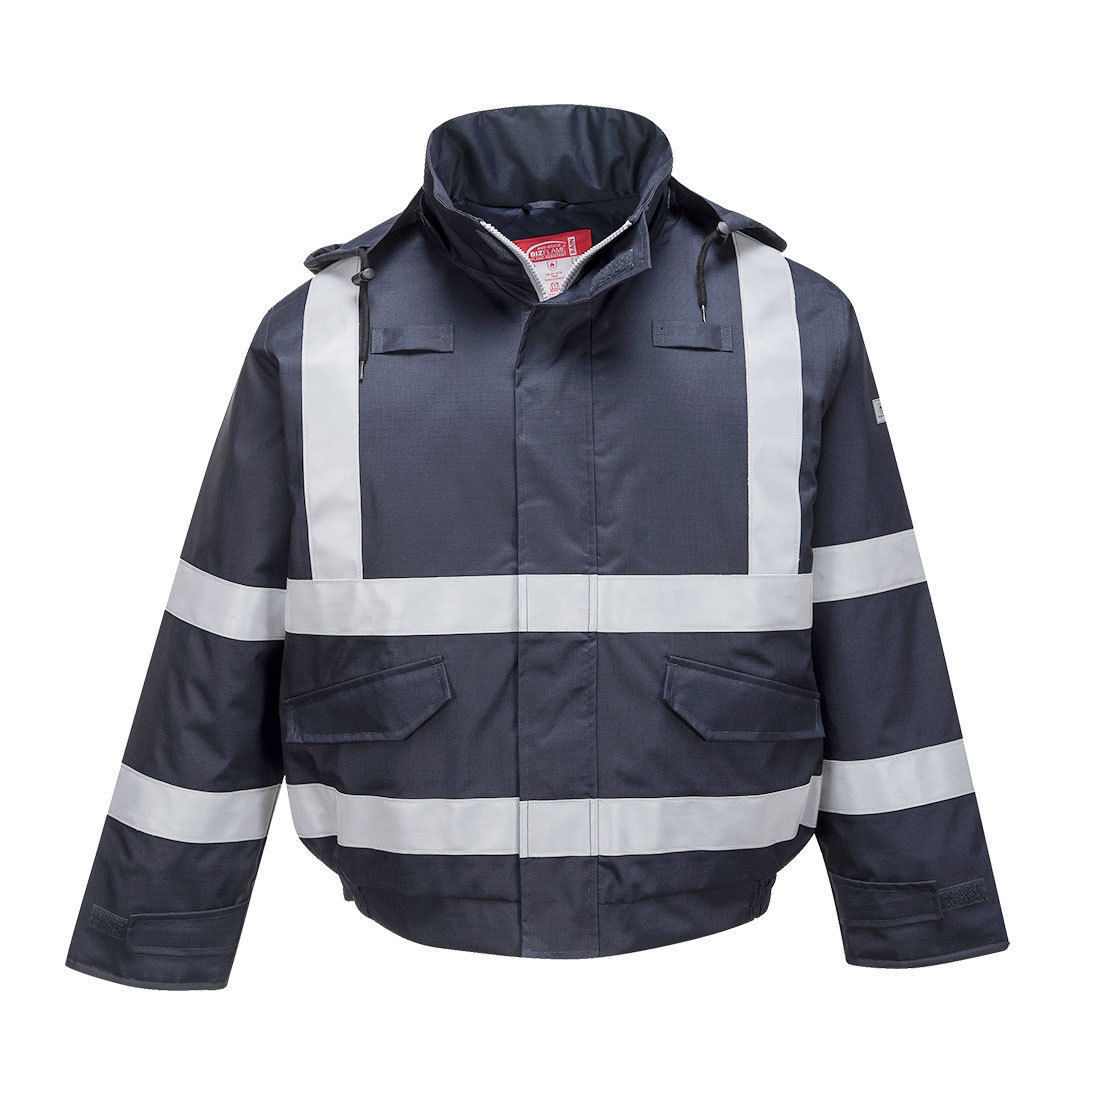 Portwest Bizflame Los Max 58% OFF Angeles Mall Bomber Jacket Hi Flame R Safety Protection Vis